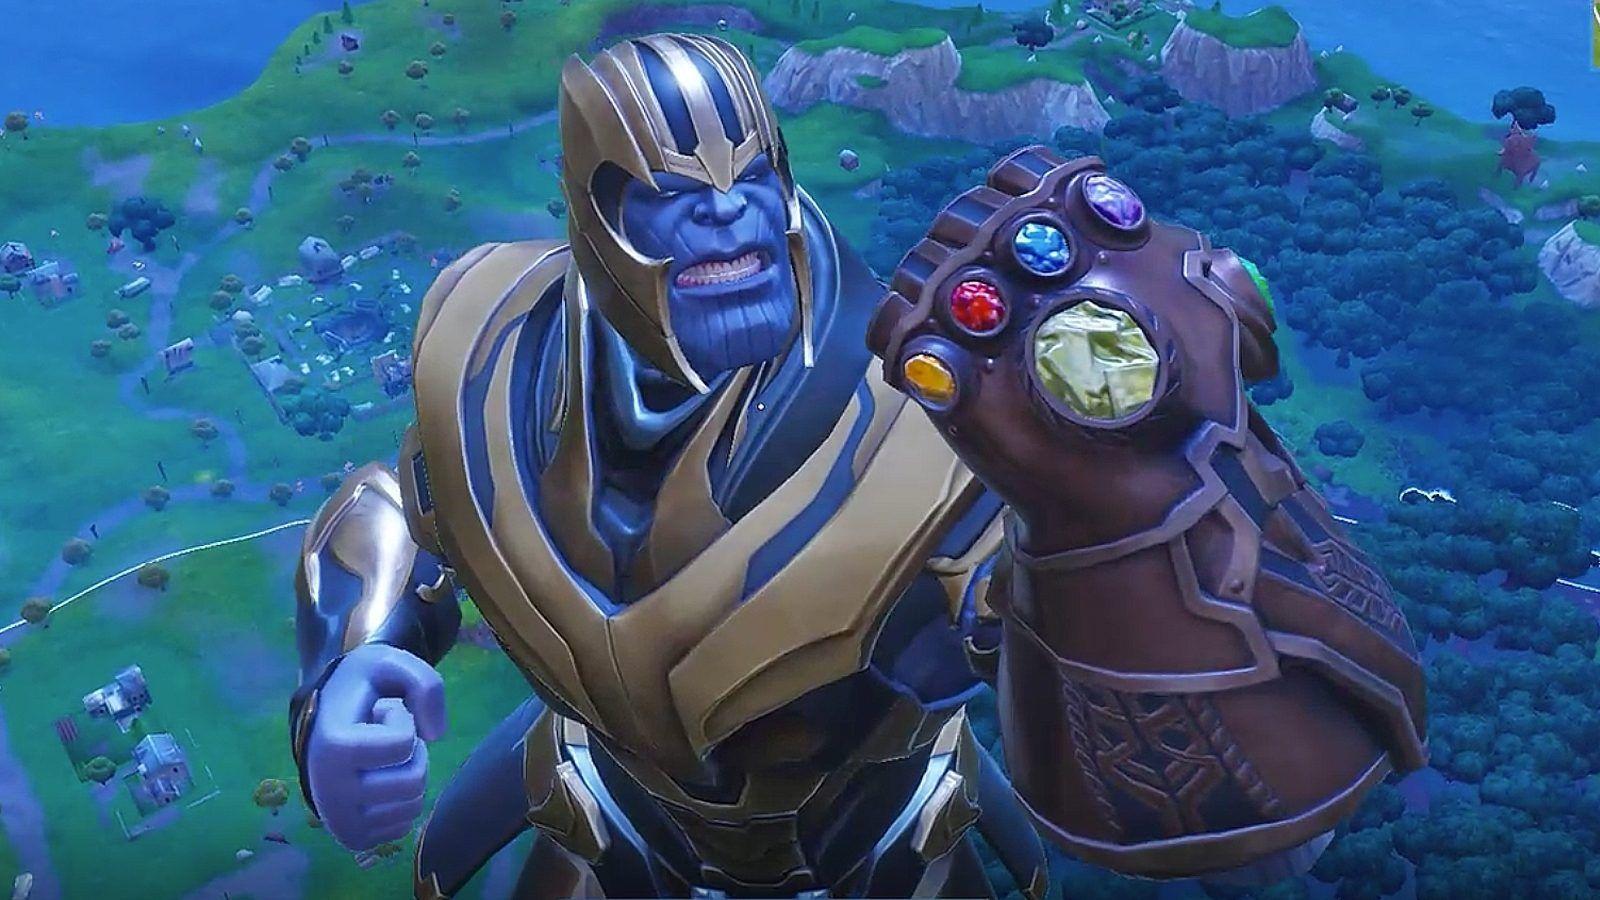 Watch Thanos dab, destroy, and dance in Fortnite